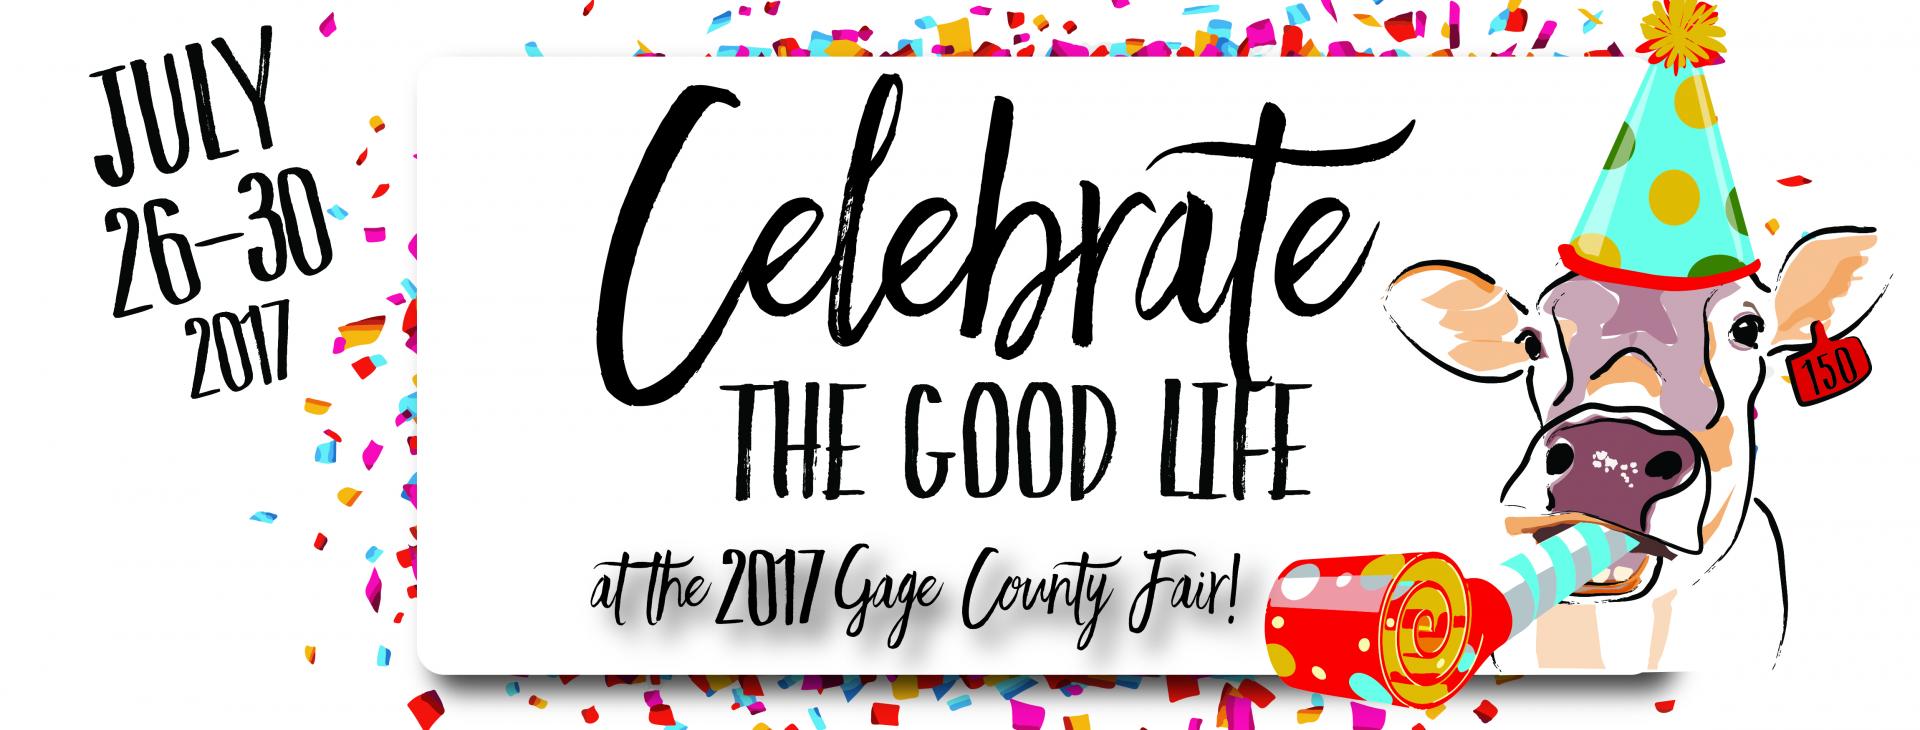 Celebrate the Good Life at the Gage County Fair